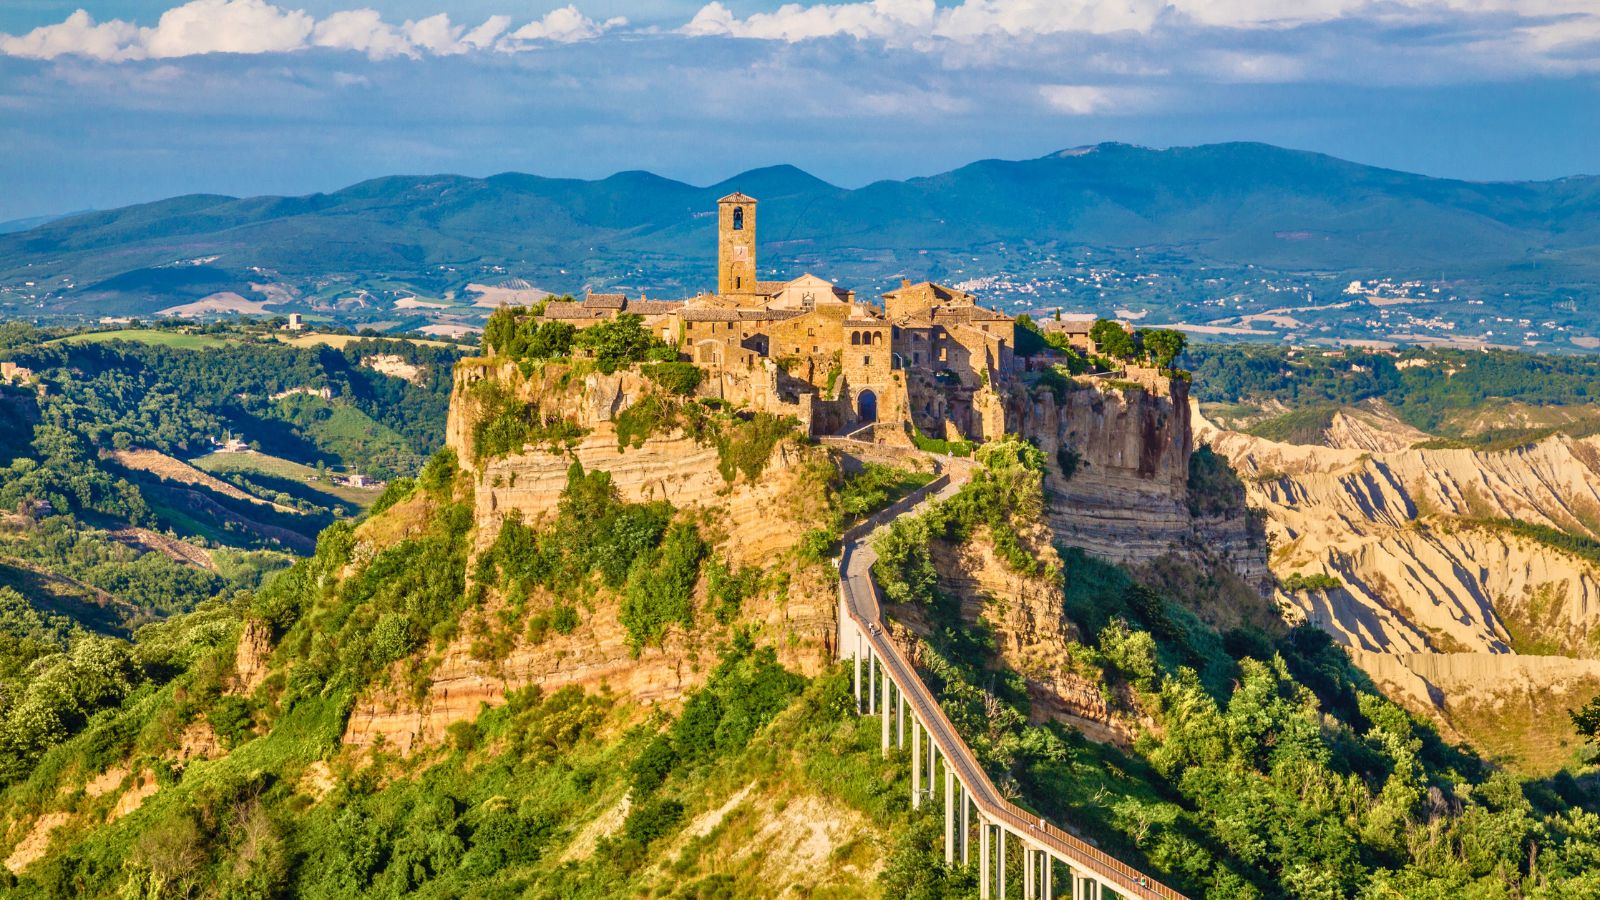 <p><span>You’re unlikely to visit anywhere else quite like Civita di Bagnoregio on your travels around Italy (or the world, for that matter). An ancient city perched atop a rocky knoll overlooking an enormous canyon, it is worth seeing simply for the location. Everything else is a bonus.</span></p><p><span>Access is via a footbridge that leads to a stone passageway first hewn 2,500 years ago by the Etruscans – an ancient entrance that acts as a portal to the Middle Ages. Civita seems frozen in time. Expect cobblestone streets, piazzas, palaces, and one point of historical intrigue after another.</span></p>